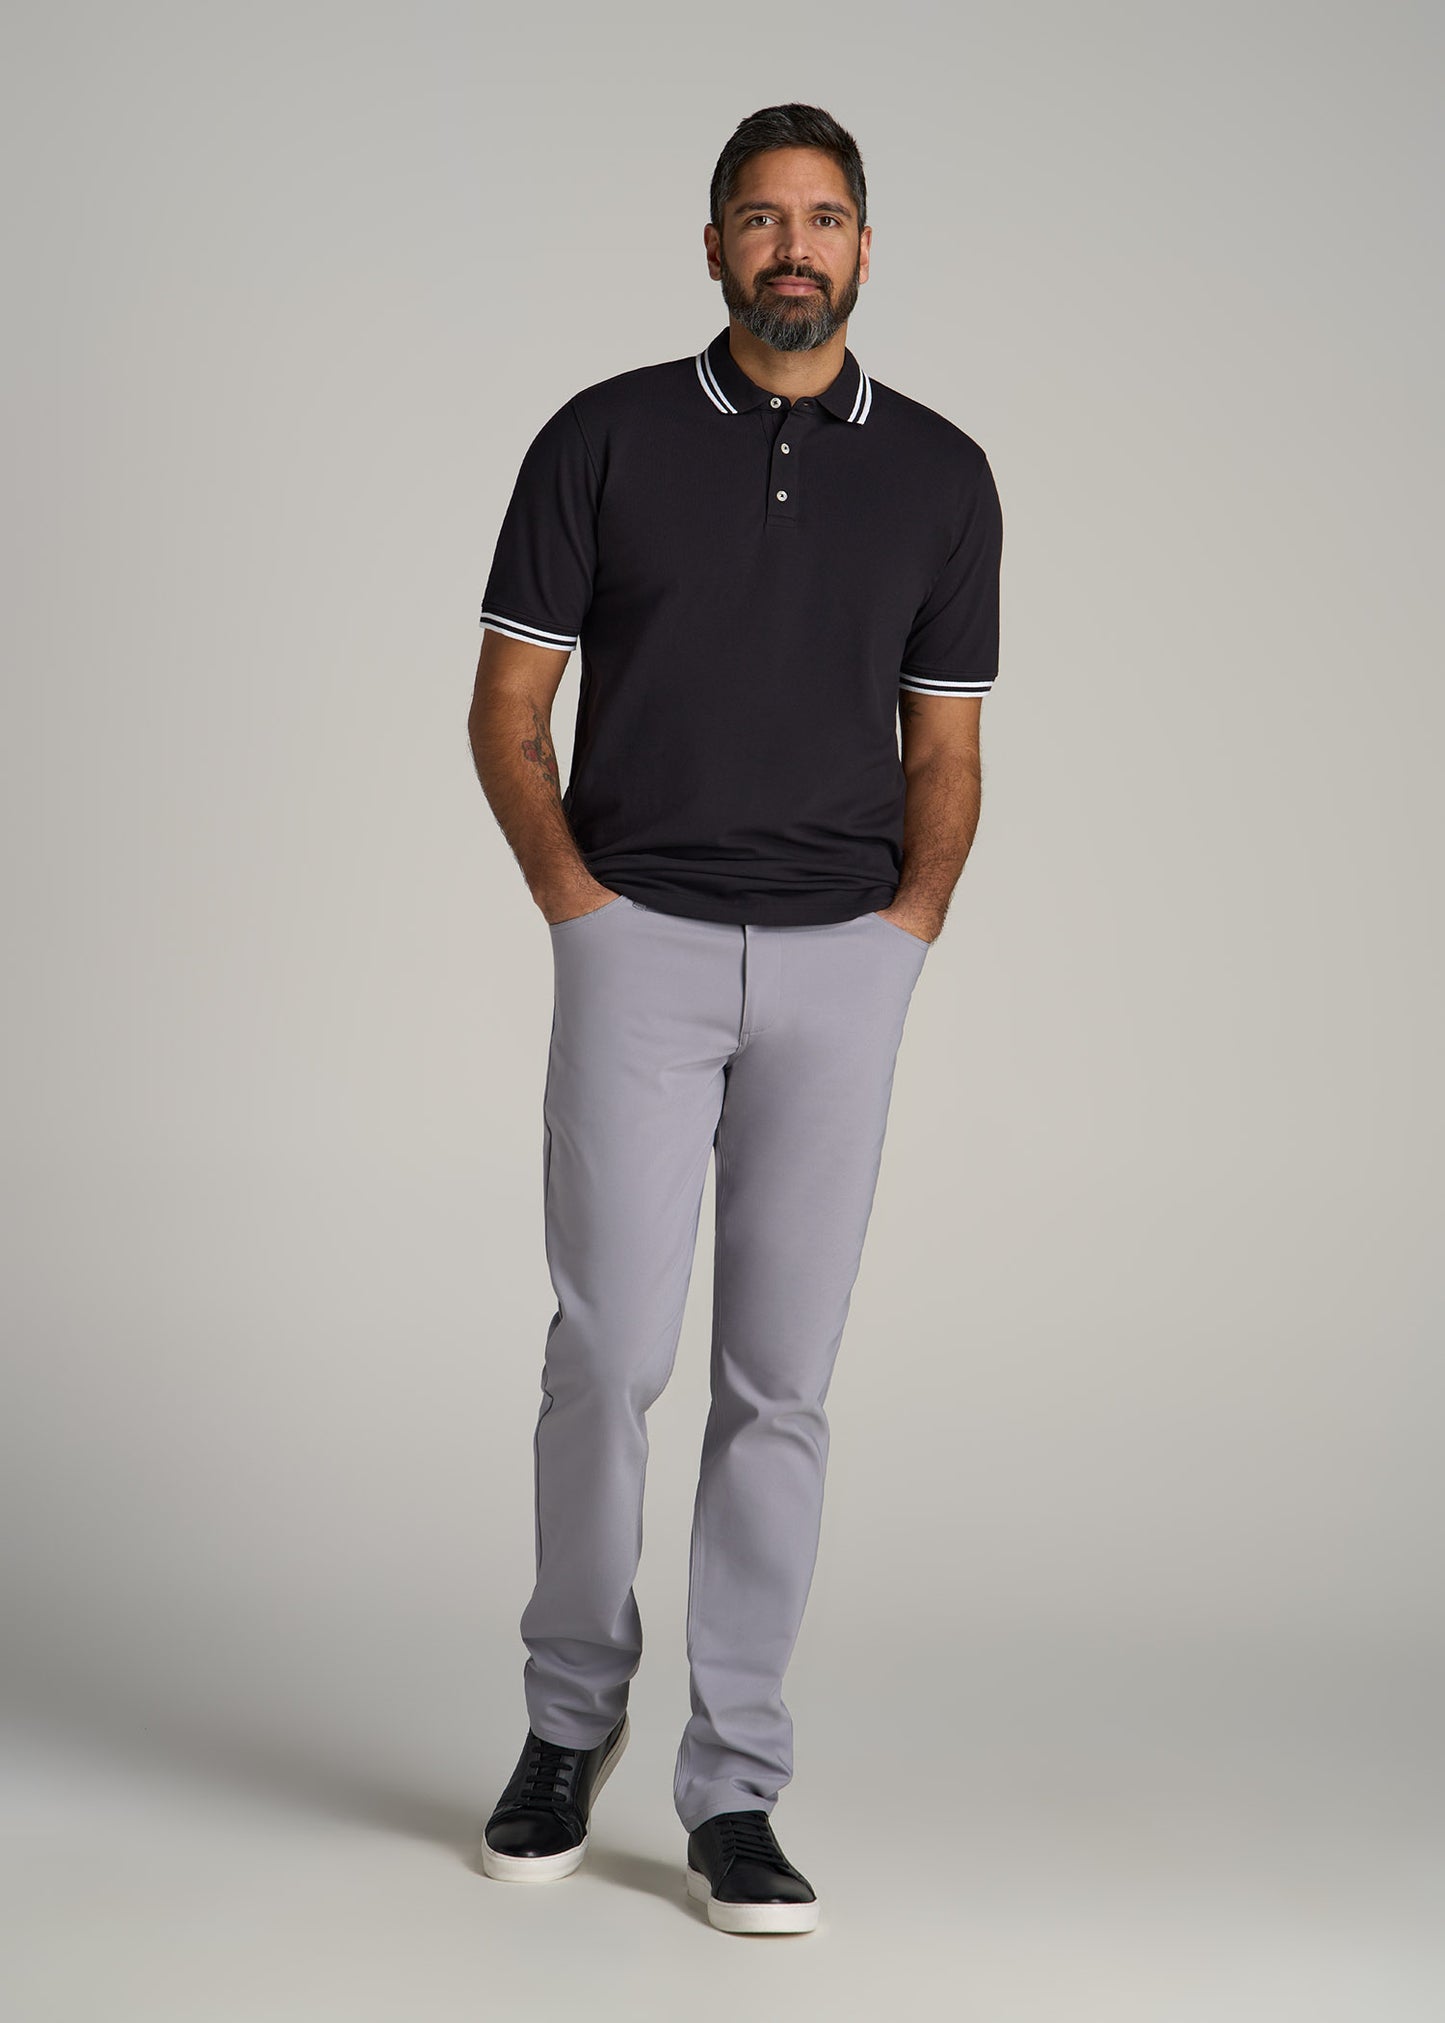 Contrast Tipped Polo Men's in Black